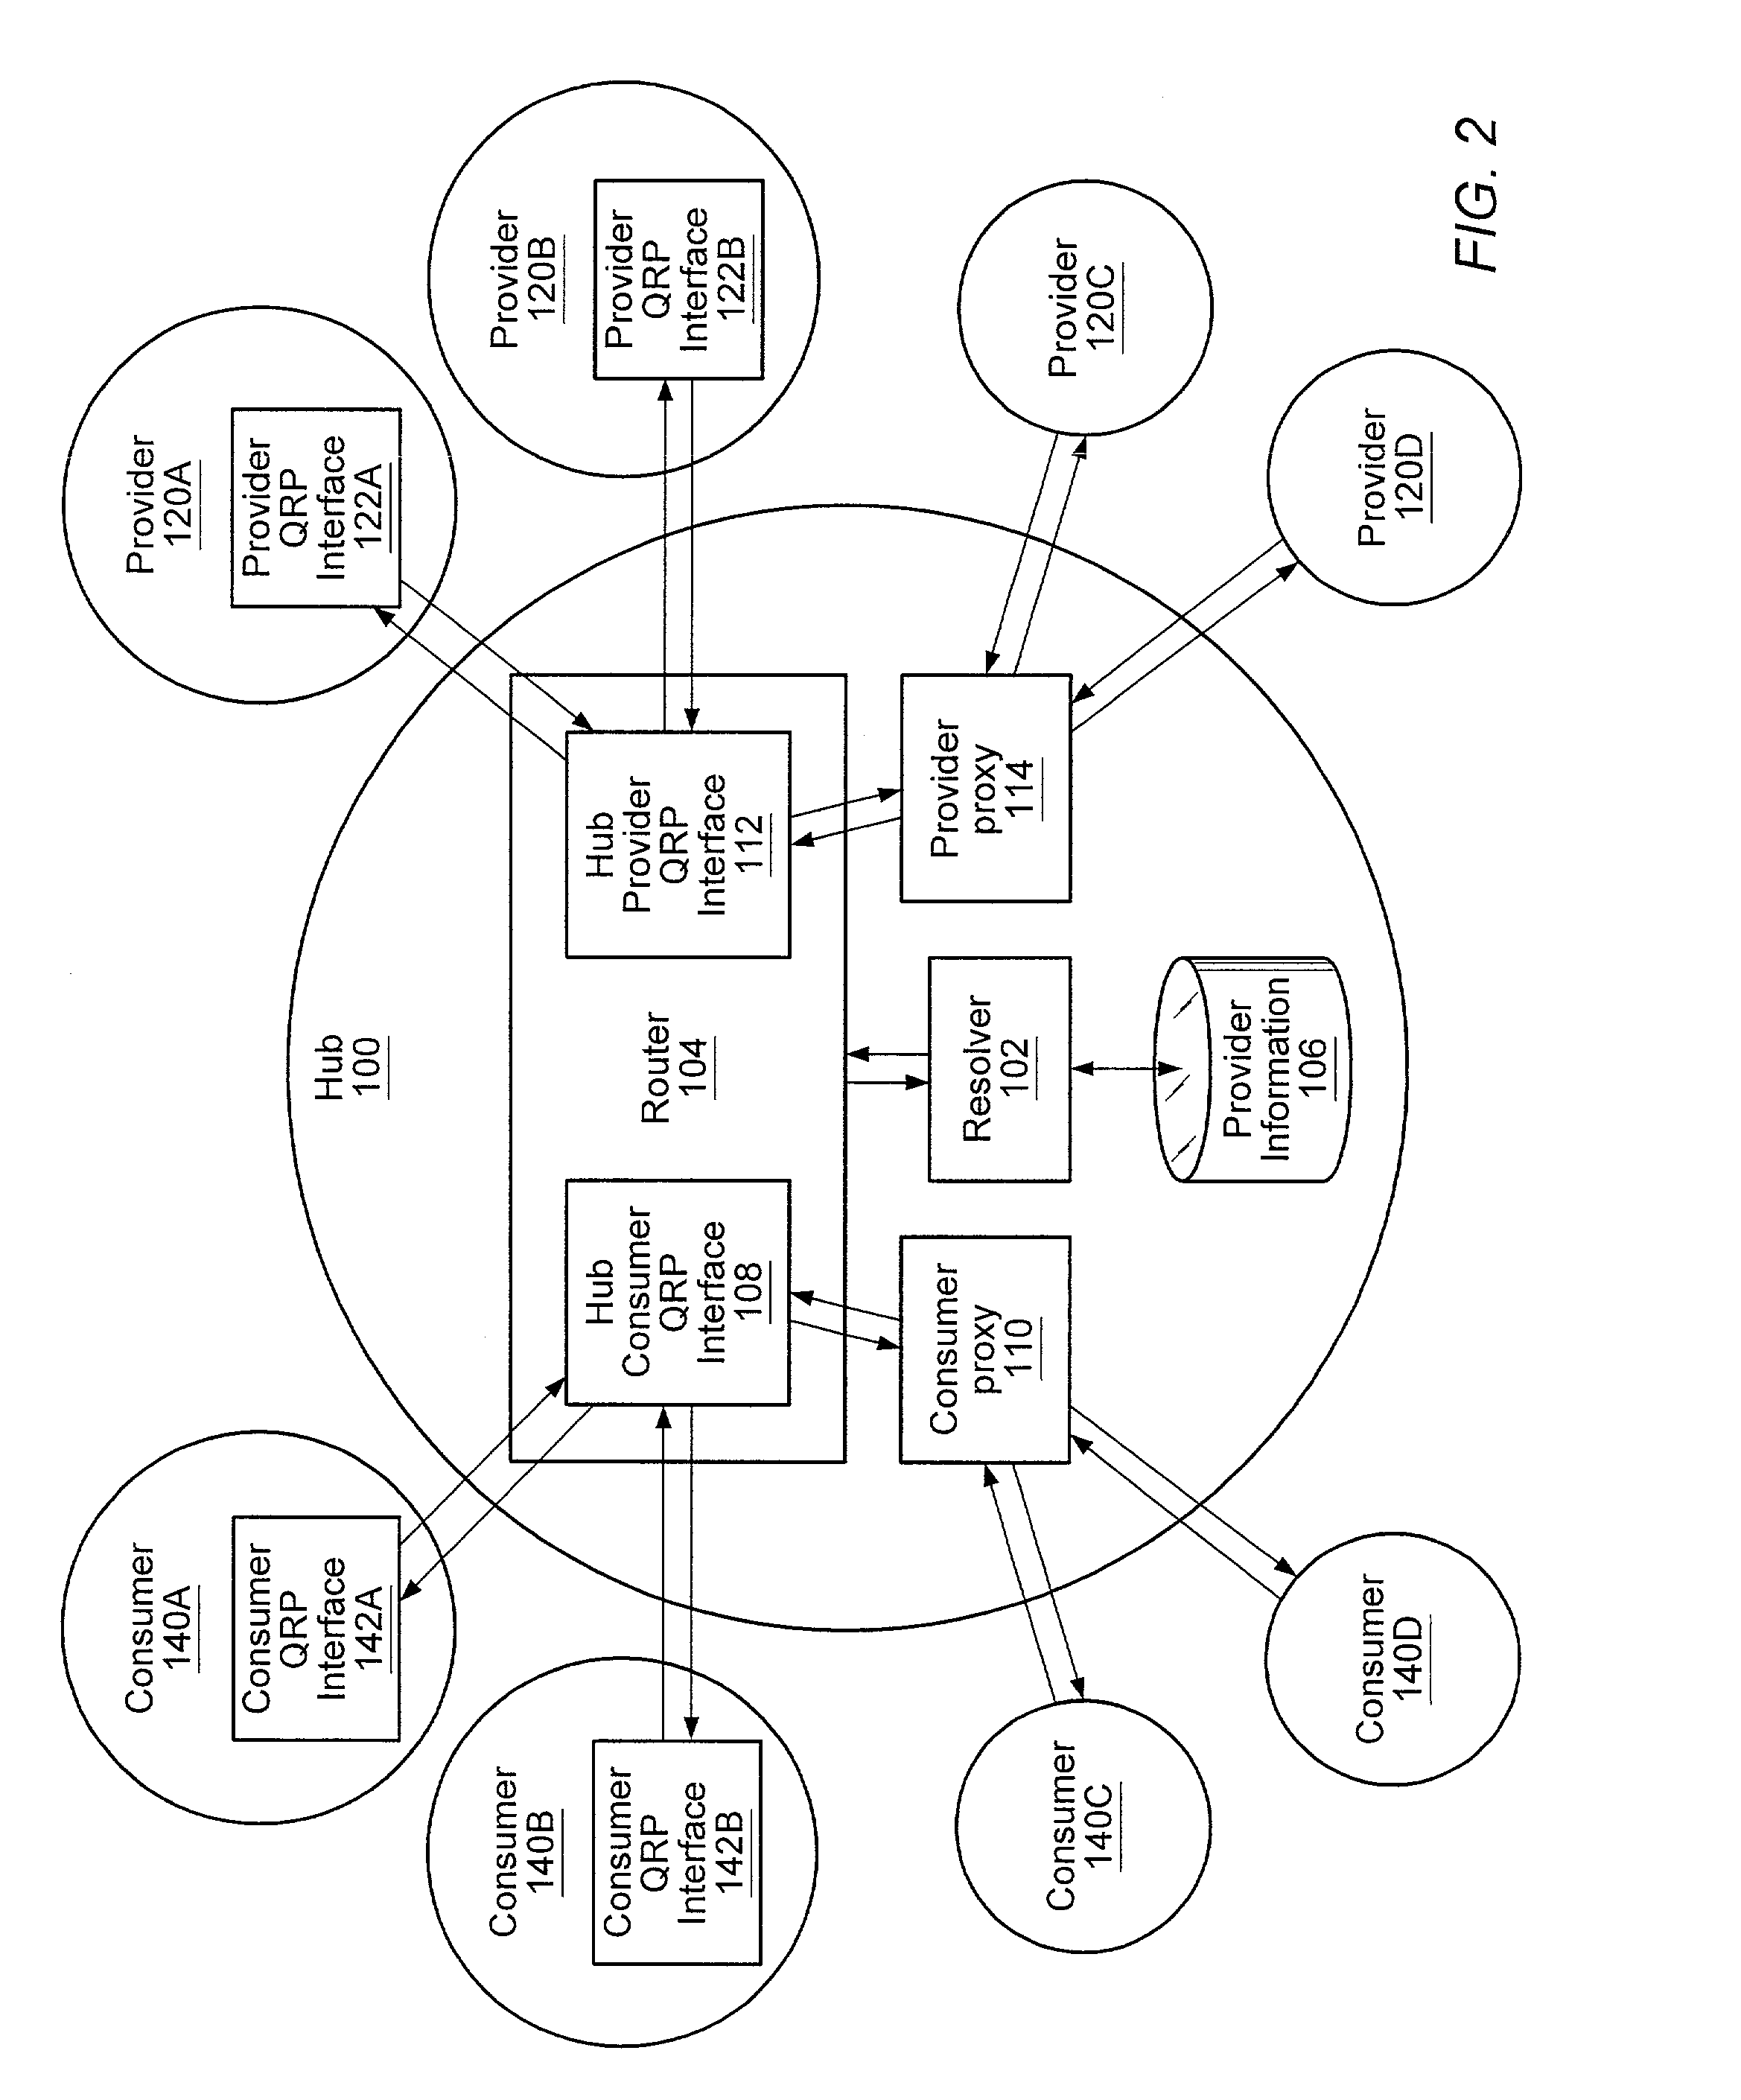 System and method for distributed real-time search